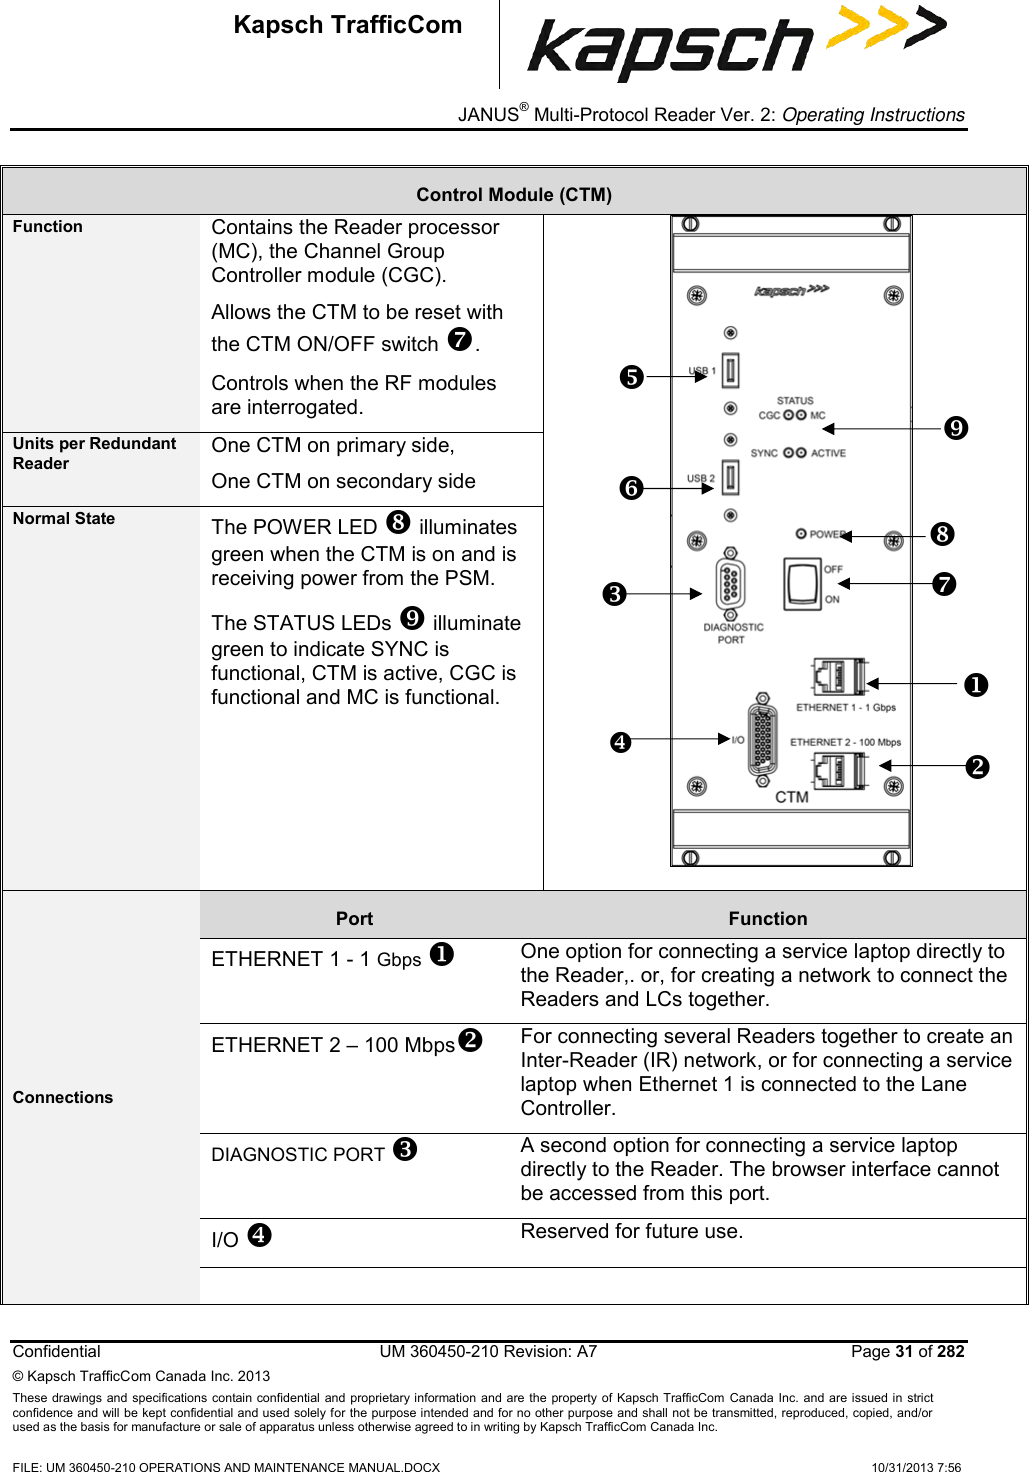 _ JANUS® Multi-Protocol Reader Ver. 2: Operating Instructions  Confidential  UM 360450-210 Revision: A7   Page 31 of 282 © Kapsch TrafficCom Canada Inc. 2013 These  drawings and specifications contain confidential  and  proprietary information and are  the  property of Kapsch TrafficCom  Canada Inc.  and are issued in strict confidence and will be kept confidential and used solely for the purpose intended and for no other purpose and shall not be transmitted, reproduced, copied, and/or used as the basis for manufacture or sale of apparatus unless otherwise agreed to in writing by Kapsch TrafficCom Canada Inc.  FILE: UM 360450-210 OPERATIONS AND MAINTENANCE MANUAL.DOCX    10/31/2013 7:56  Kapsch TrafficCom Control Module (CTM) Function Contains the Reader processor (MC), the Channel Group Controller module (CGC). Allows the CTM to be reset with the CTM ON/OFF switch .  Controls when the RF modules are interrogated. X   Units per Redundant Reader One CTM on primary side, One CTM on secondary side Normal State The POWER LED  illuminates green when the CTM is on and is receiving power from the PSM.  The STATUS LEDs  illuminate green to indicate SYNC is functional, CTM is active, CGC is functional and MC is functional.  Connections Port  Function ETHERNET 1 - 1 Gbps  One option for connecting a service laptop directly to the Reader,. or, for creating a network to connect the Readers and LCs together. ETHERNET 2 – 100 Mbps For connecting several Readers together to create an Inter-Reader (IR) network, or for connecting a service laptop when Ethernet 1 is connected to the Lane Controller.  DIAGNOSTIC PORT  A second option for connecting a service laptop directly to the Reader. The browser interface cannot be accessed from this port. I/O  Reserved for future use.                     